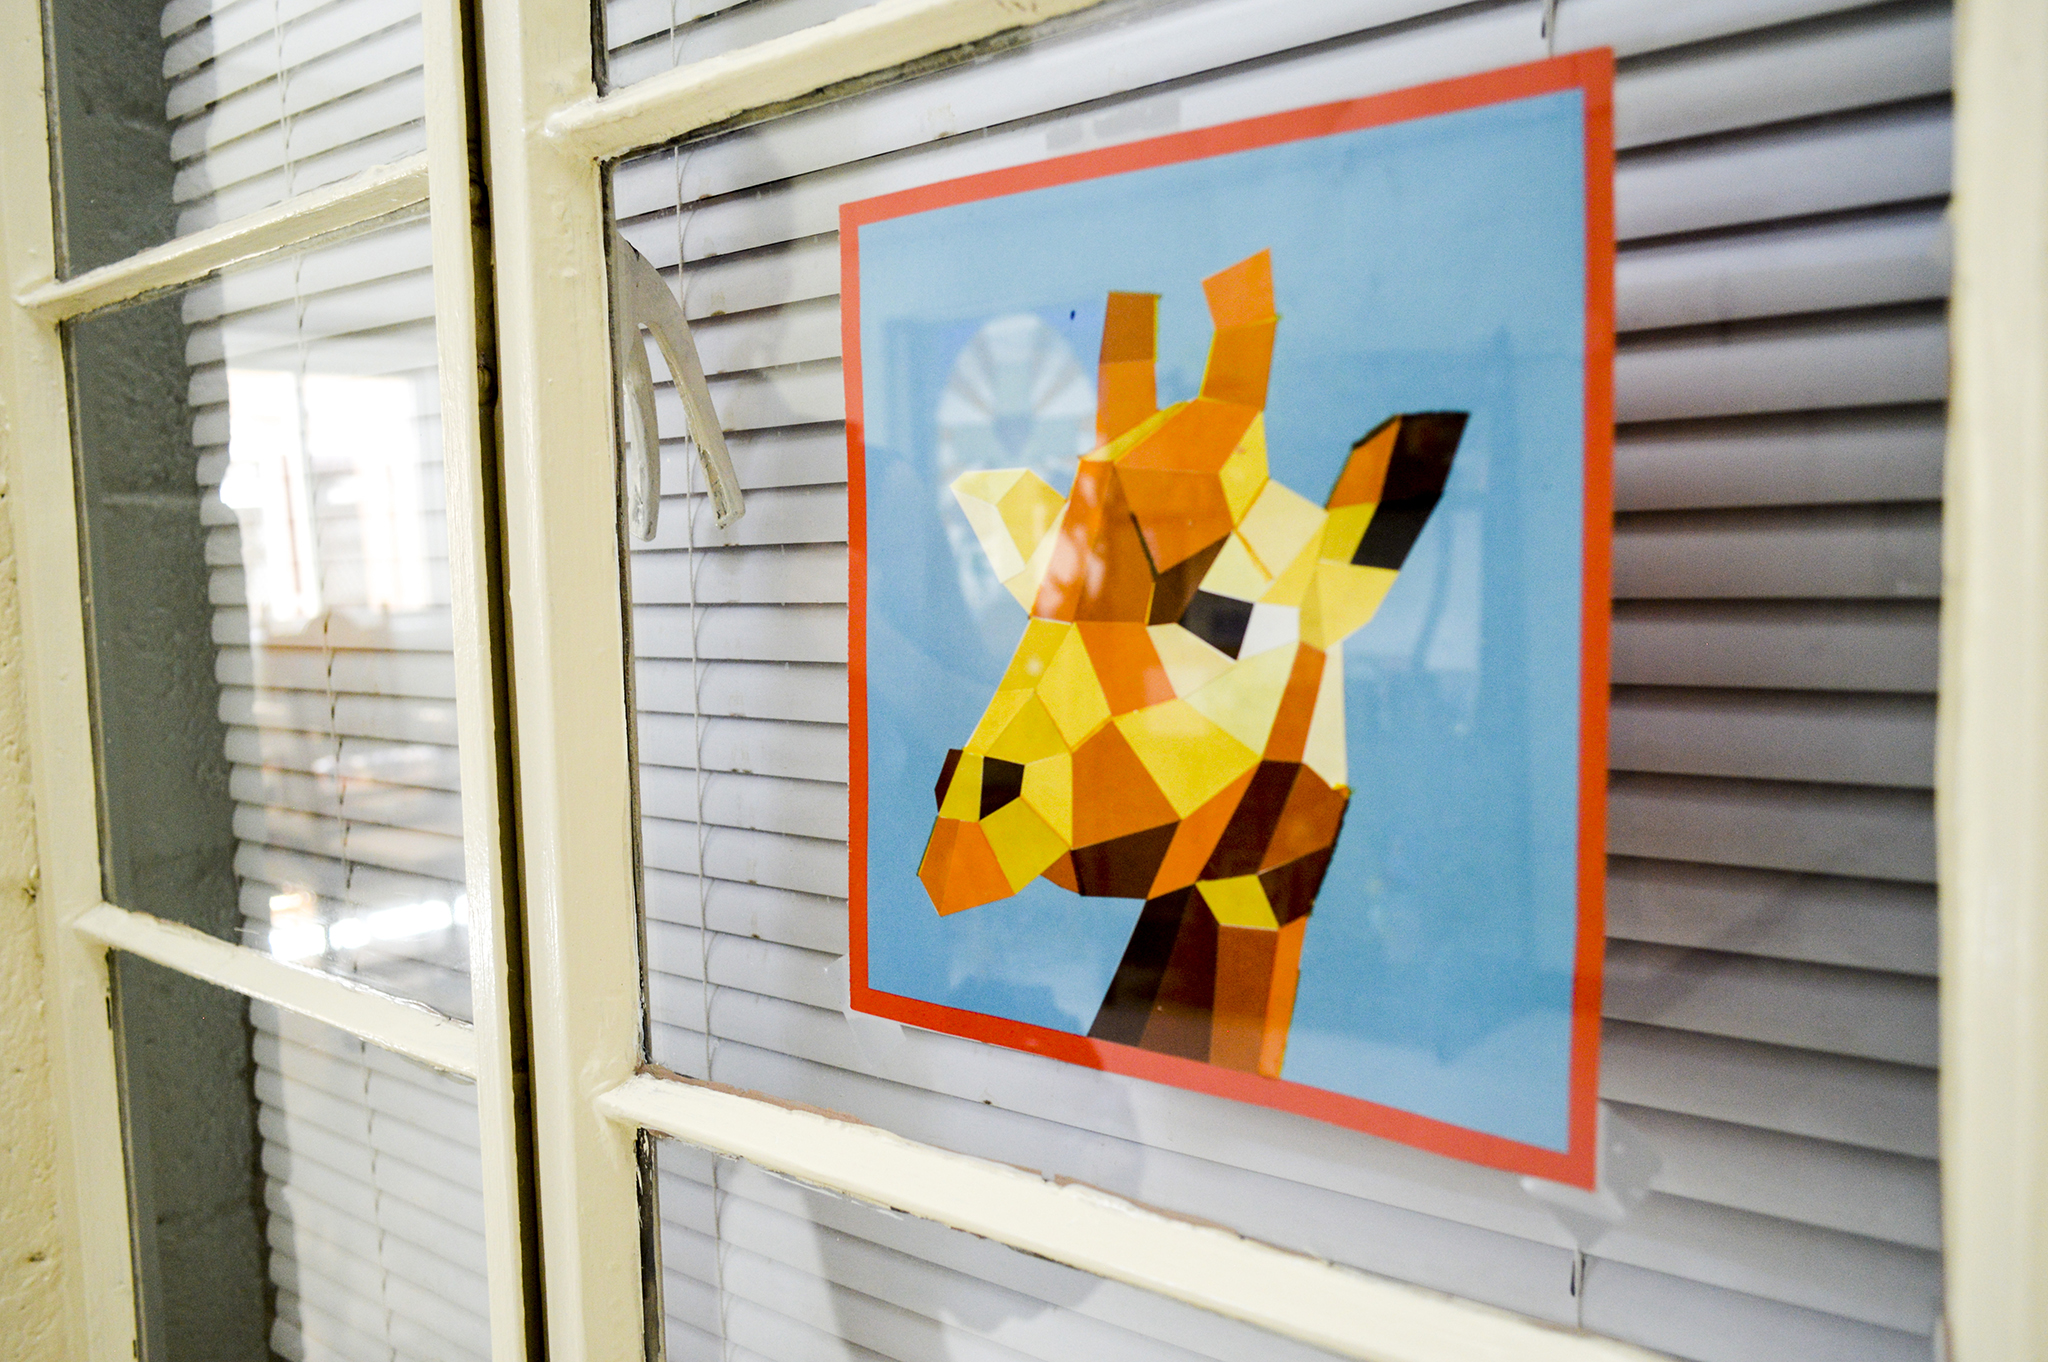 A giraffe mosaic art piece made by Gloria’s youngest daughter hangs  is shown in the window of Gloria’s room.